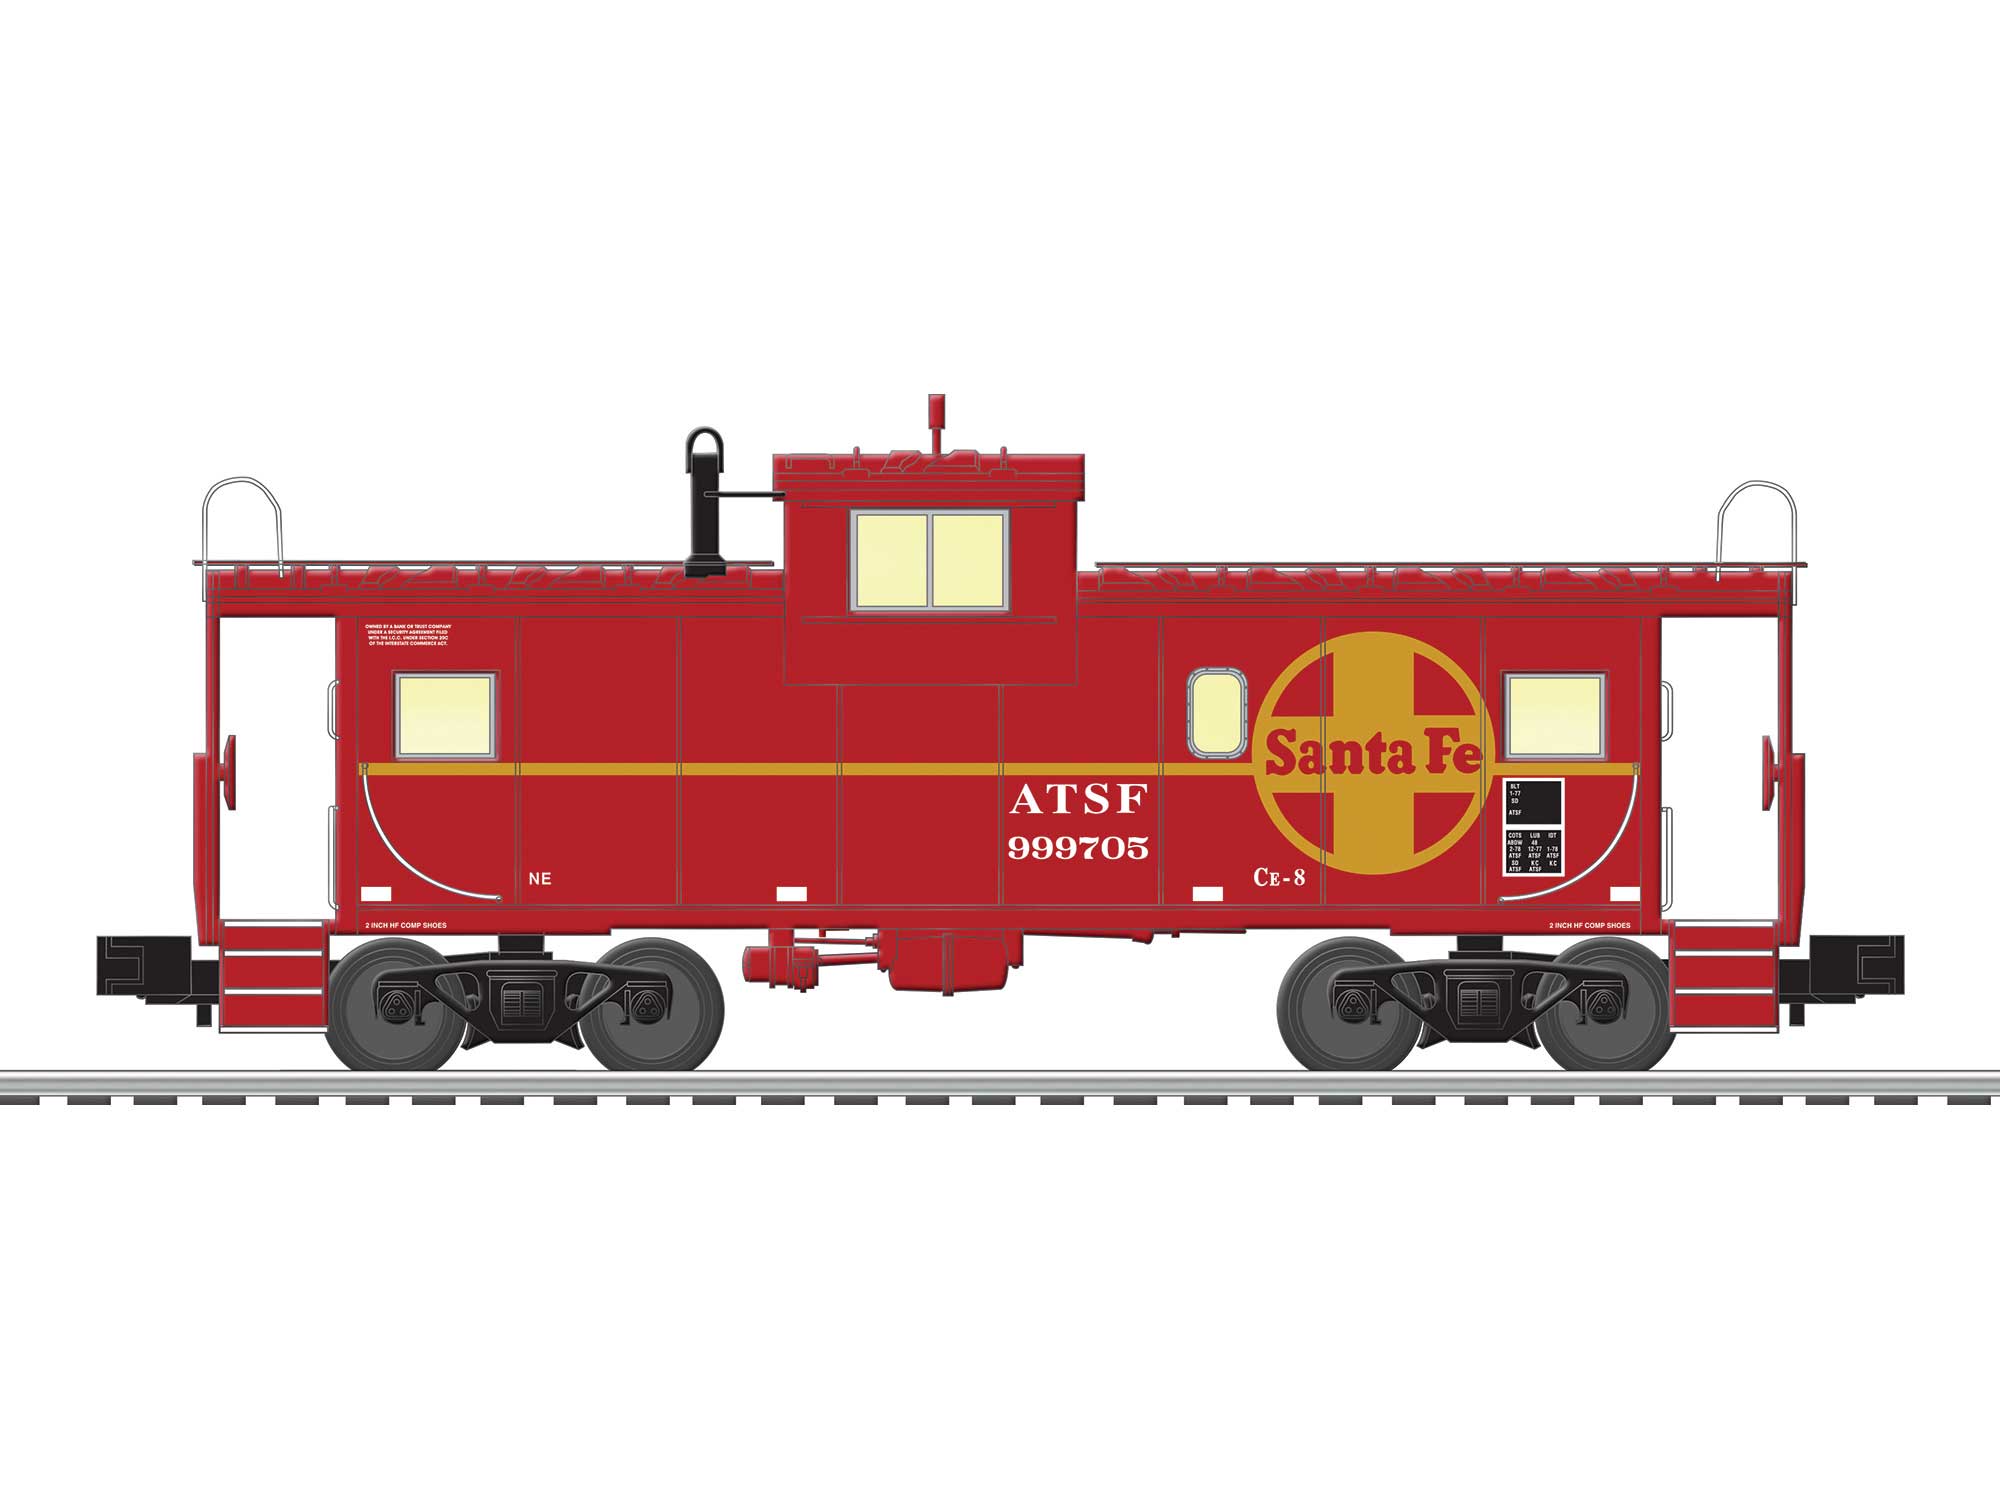 Wgt # 999135 Details about   Tyco Santa Fe Wide Vision Caboose 